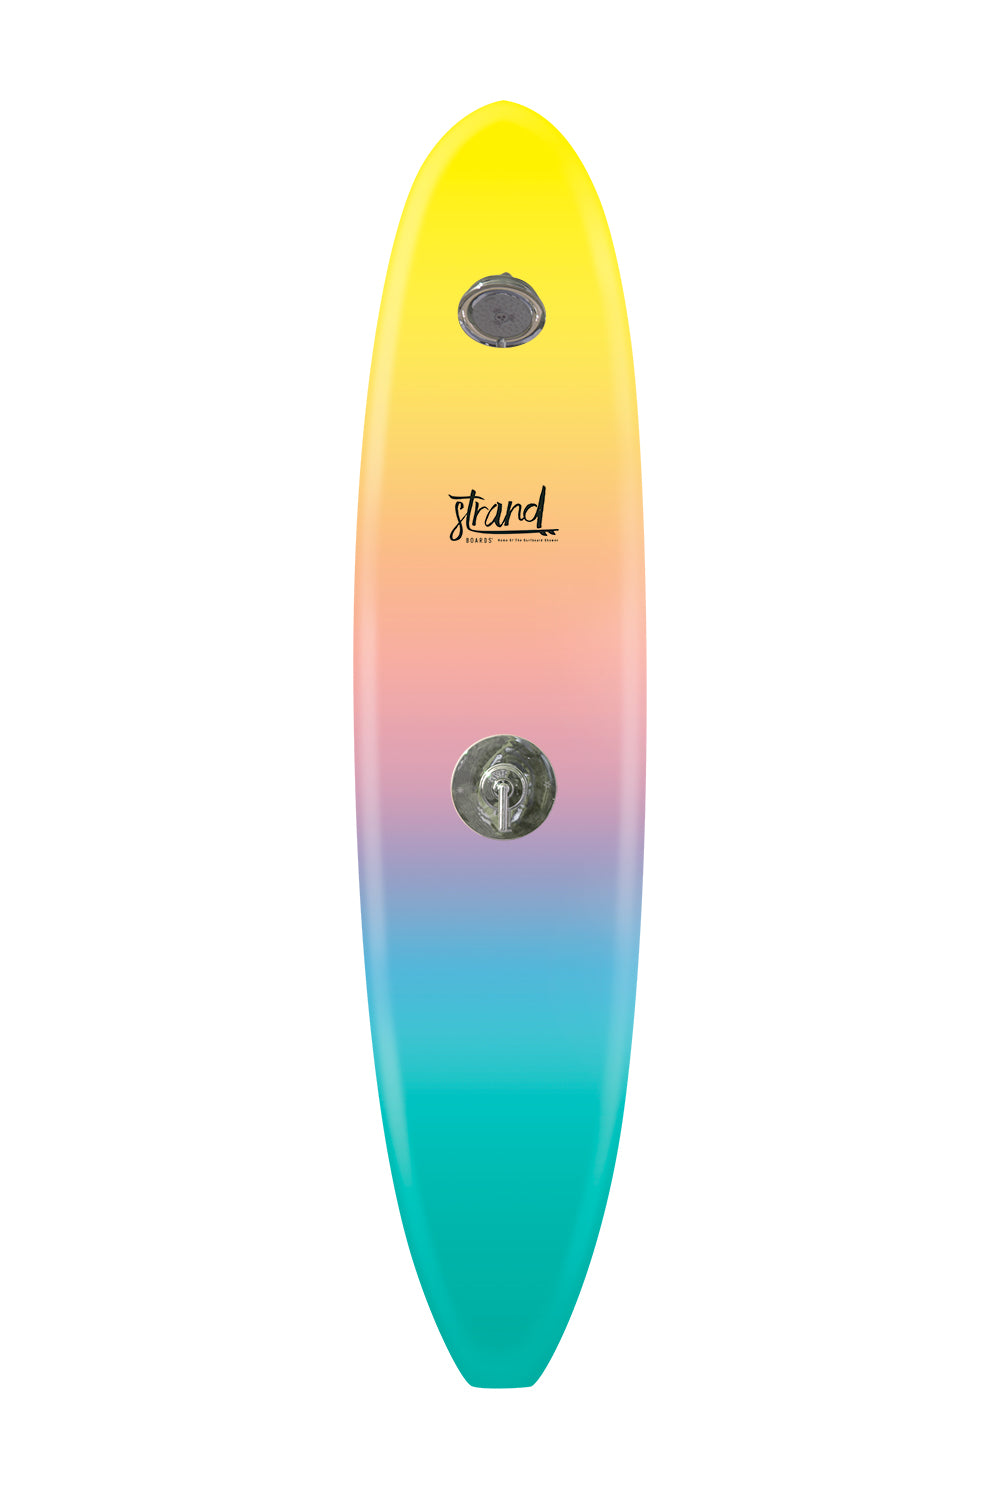 Strand Boards® Strand Series Ibiza Outdoor Surfboard Shower in yellow, pale orange, pink, purple, teal, turquoise with Classic Component